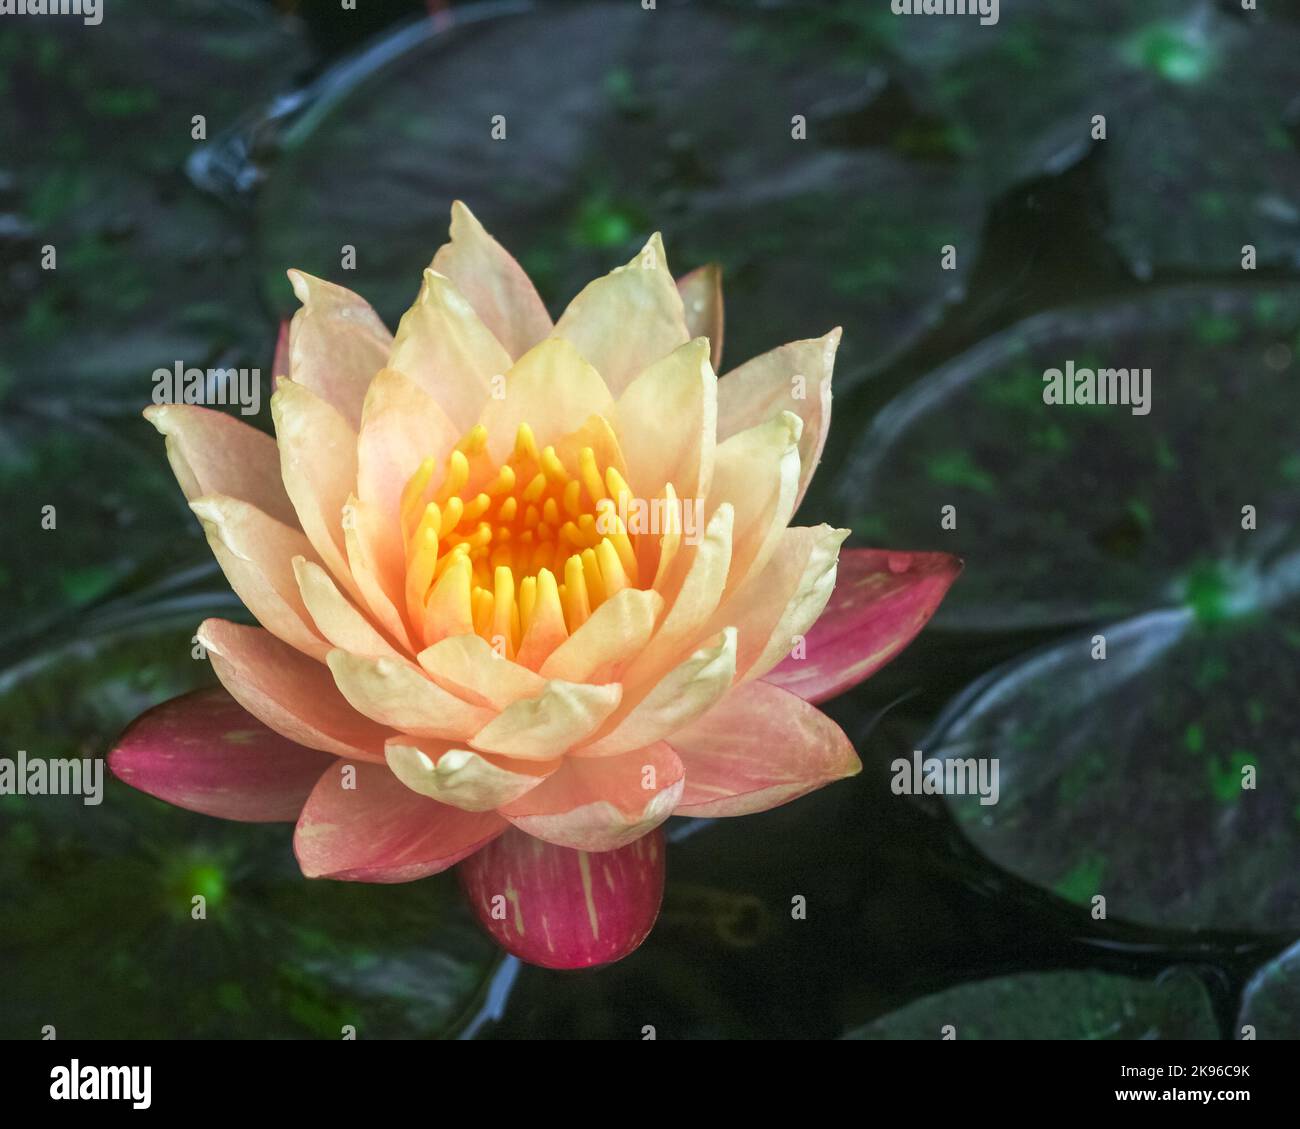 Closeup view of bright creamy orange pink water lily wanvisa nymphaea flower isolated outdoors on natural background Stock Photo